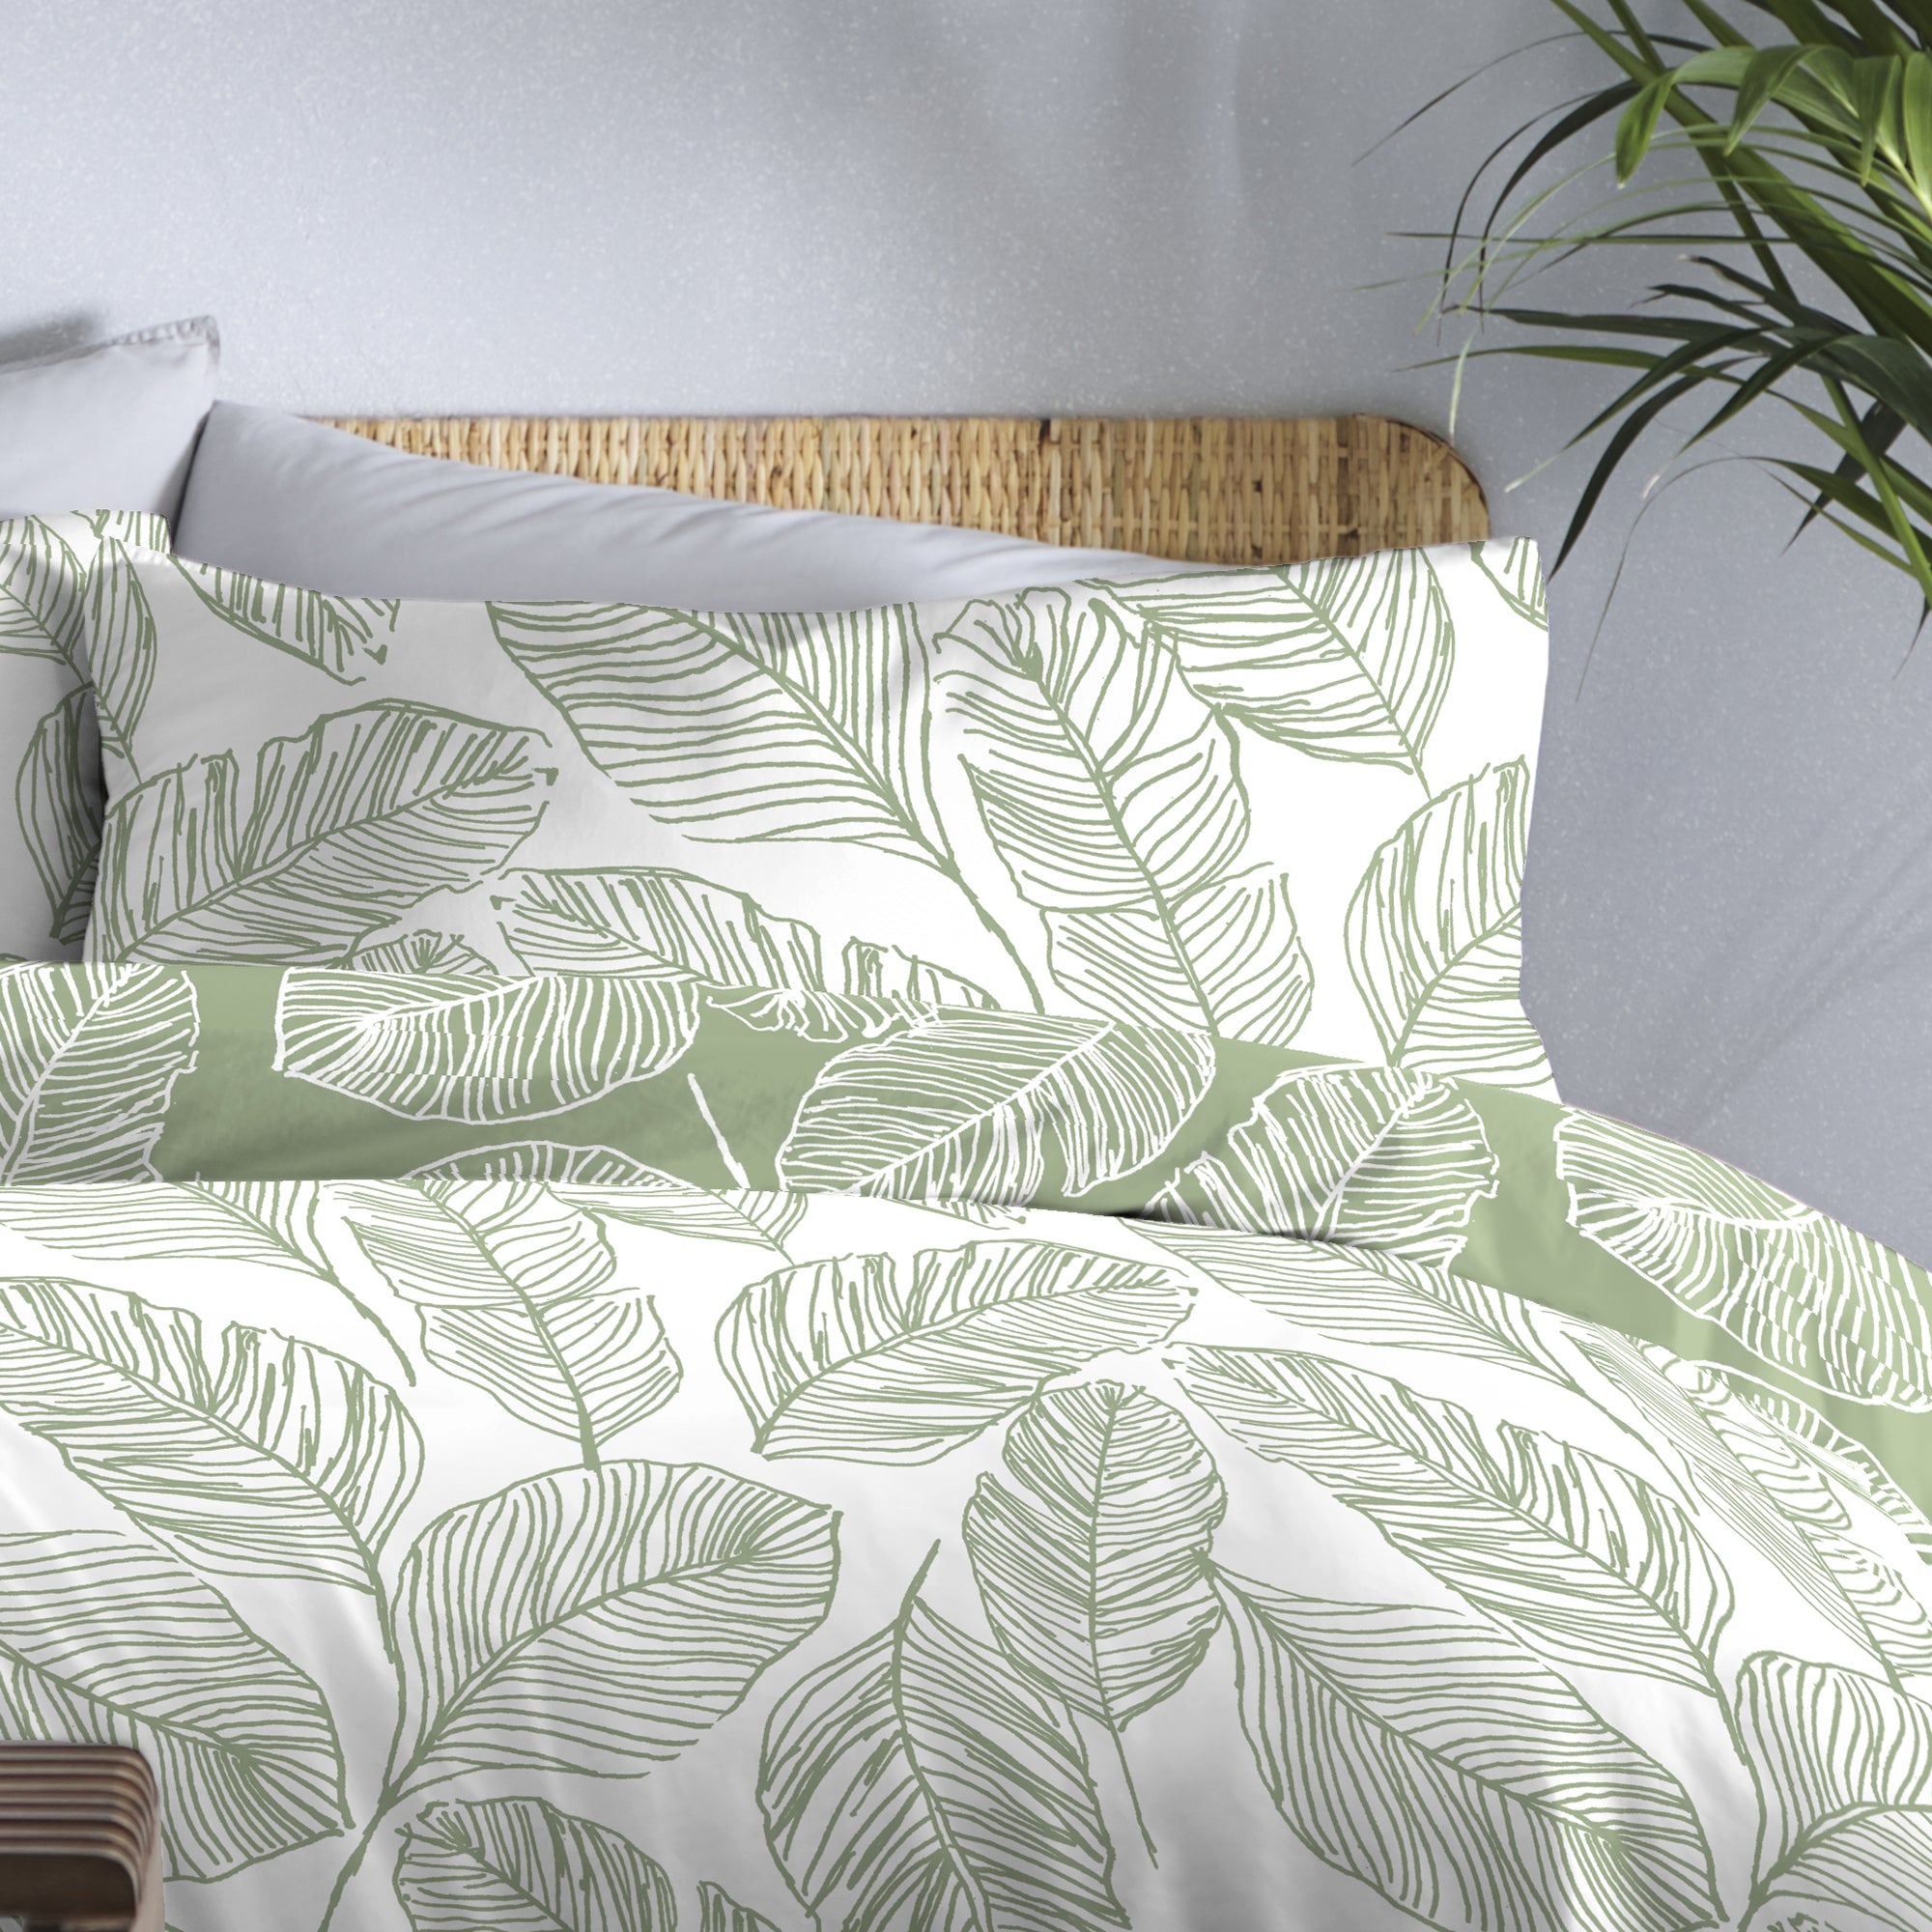 Matteo - Easy Care Duvet Cover Set in Green - By Fusion